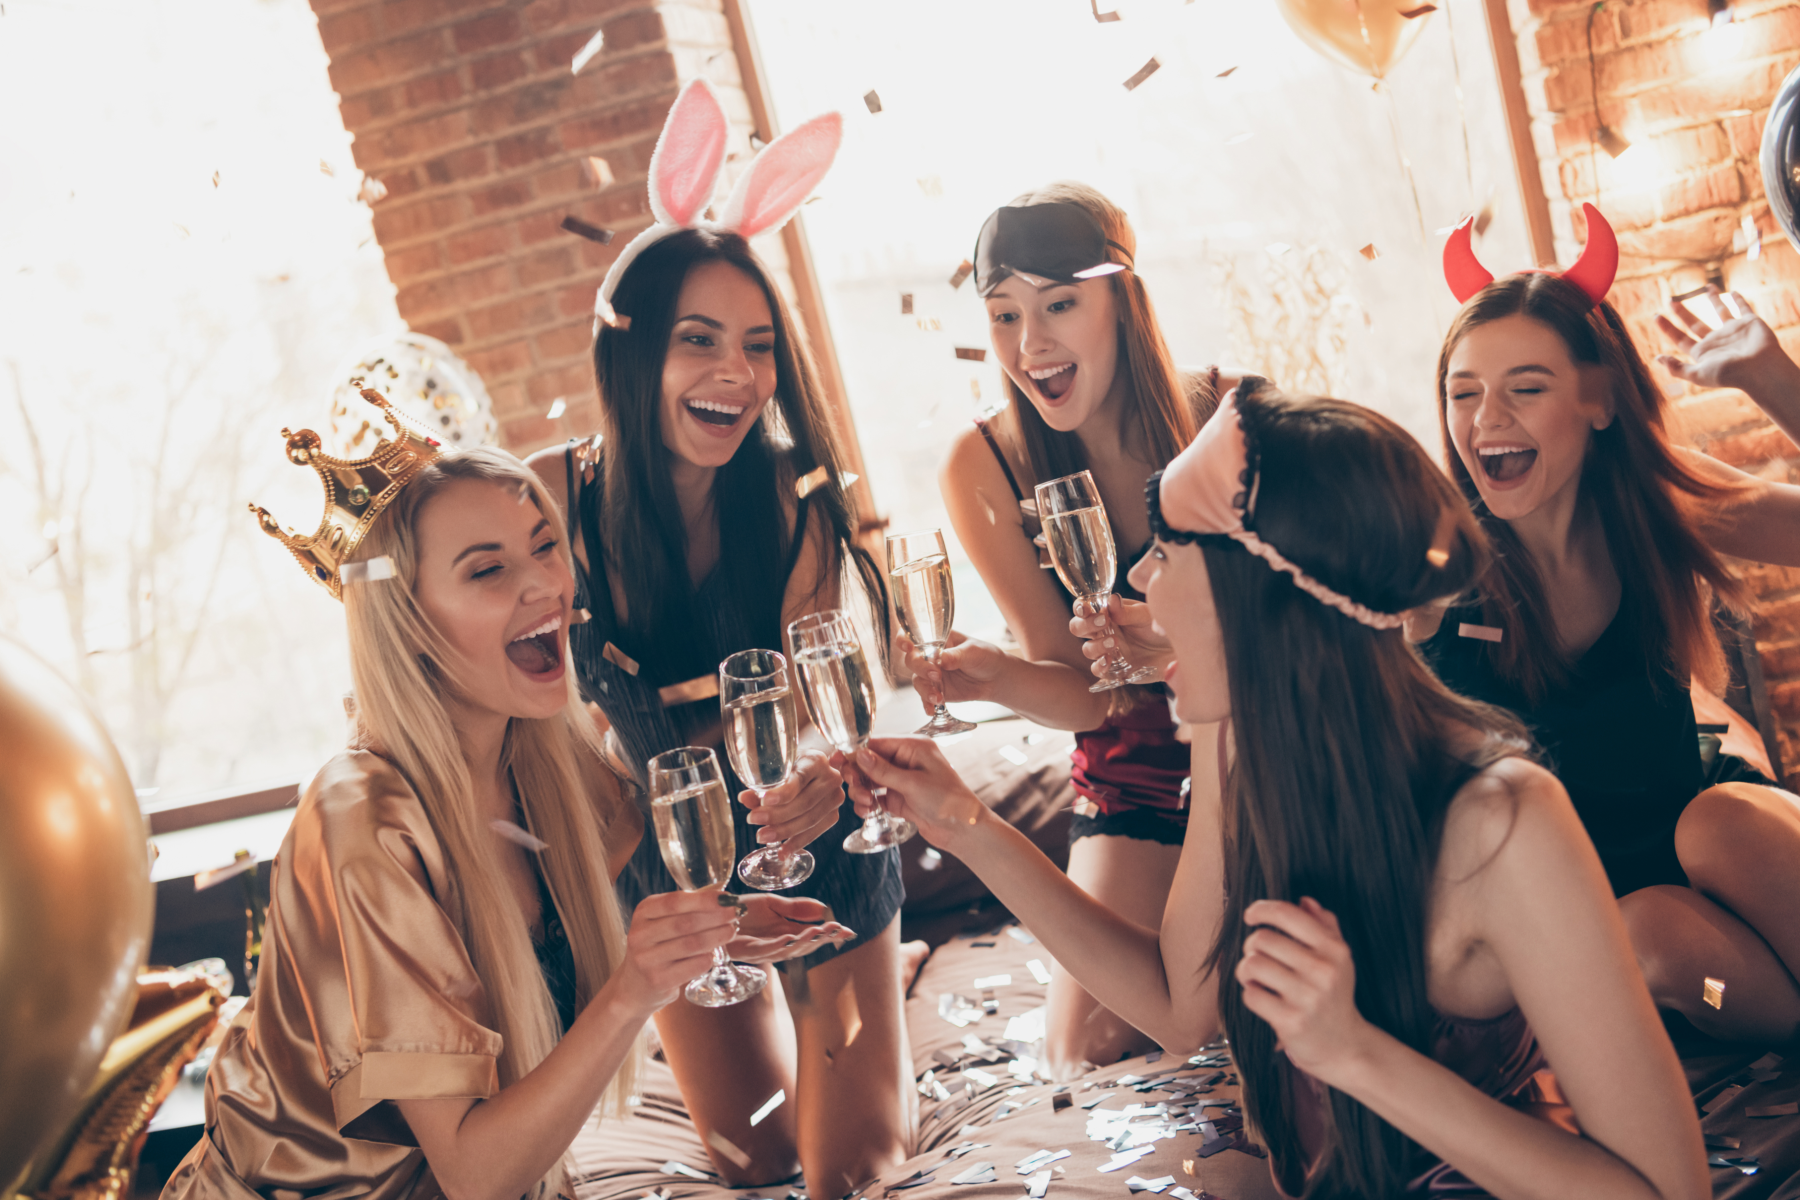 Women toast with Champagne flutes while wearing playful costume headbands like bunny ears and devil horns.